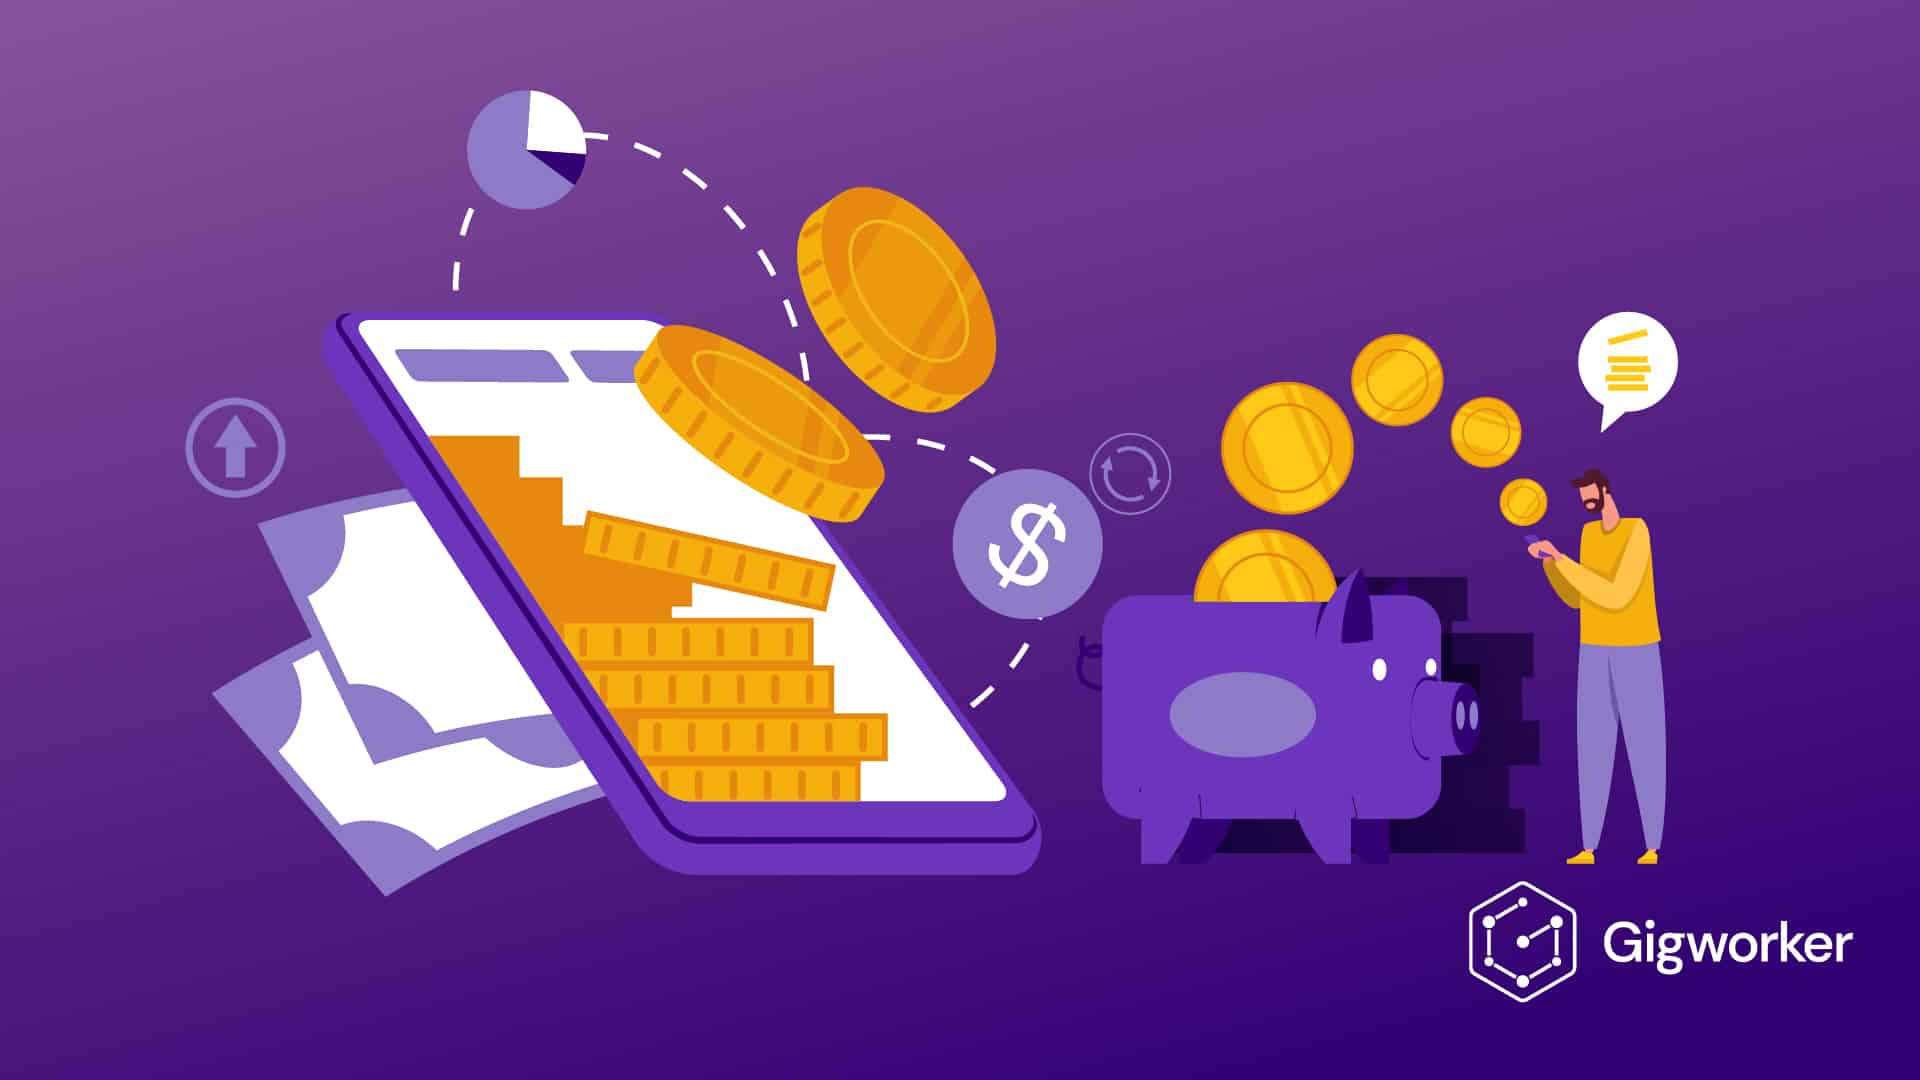 vector graphic showing an illustration of making money online for beginners